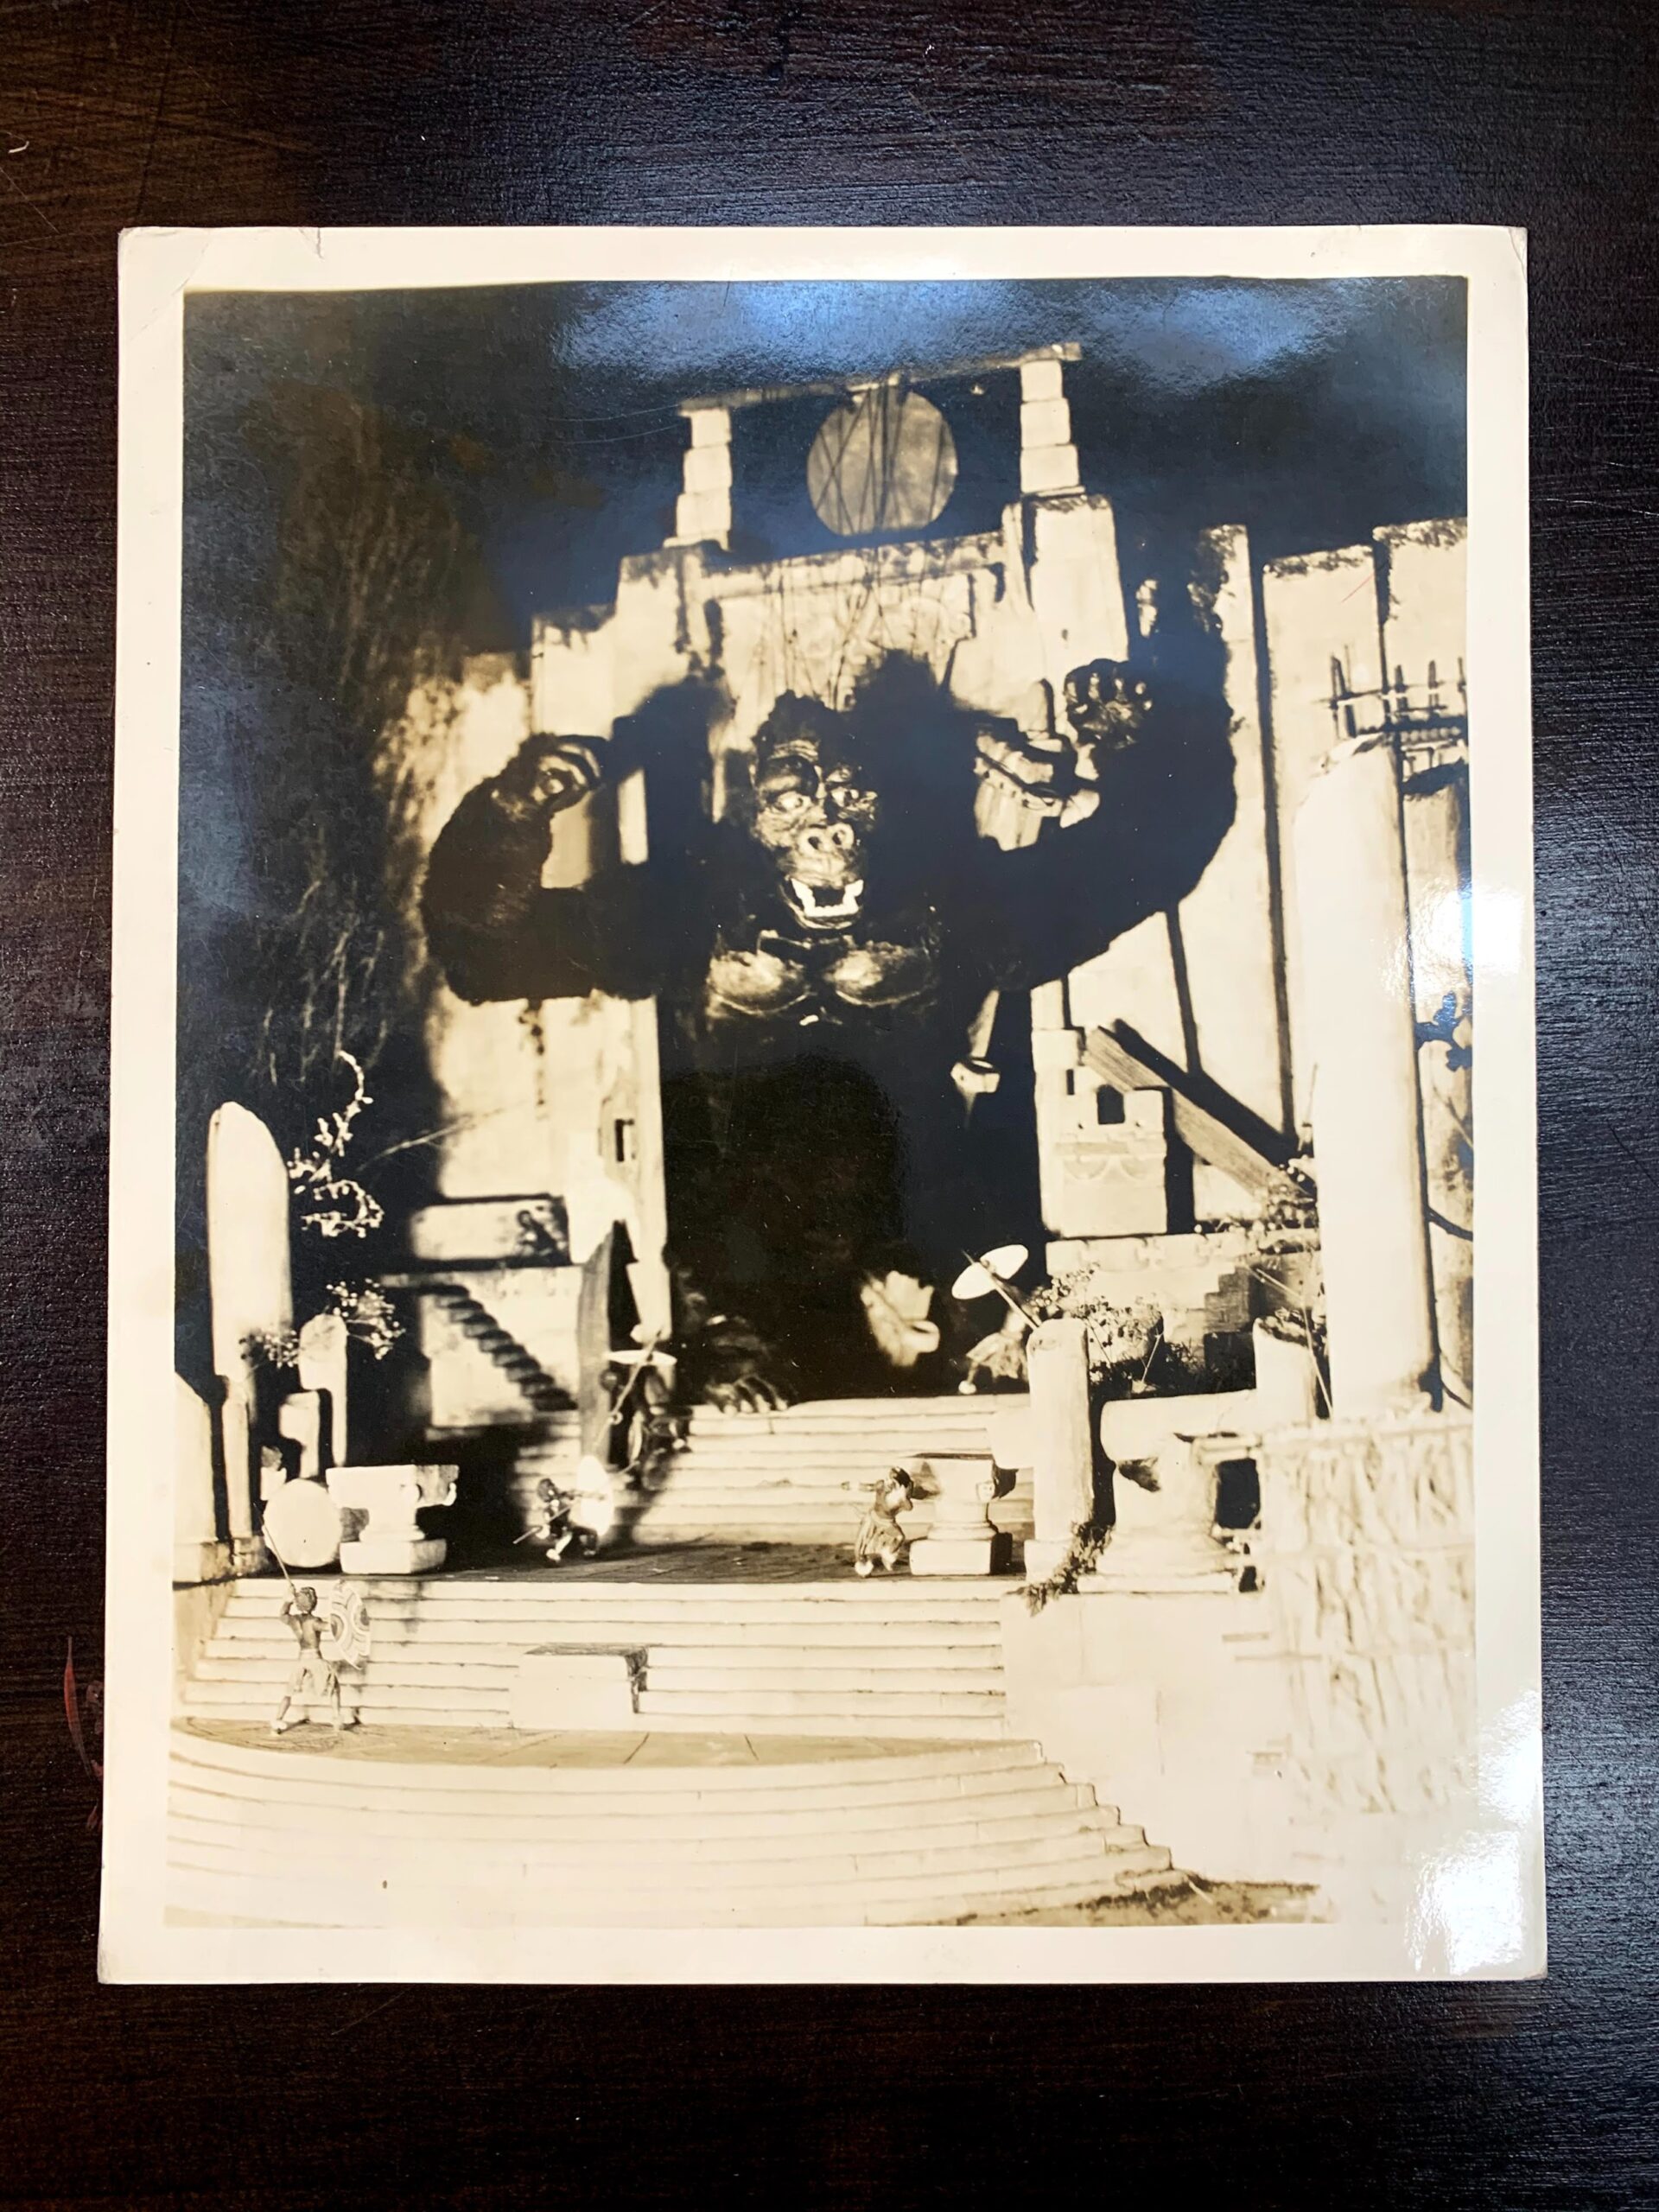 King Kong By McElroy (1933) US 8x10 Marionette Movie Still Photograph